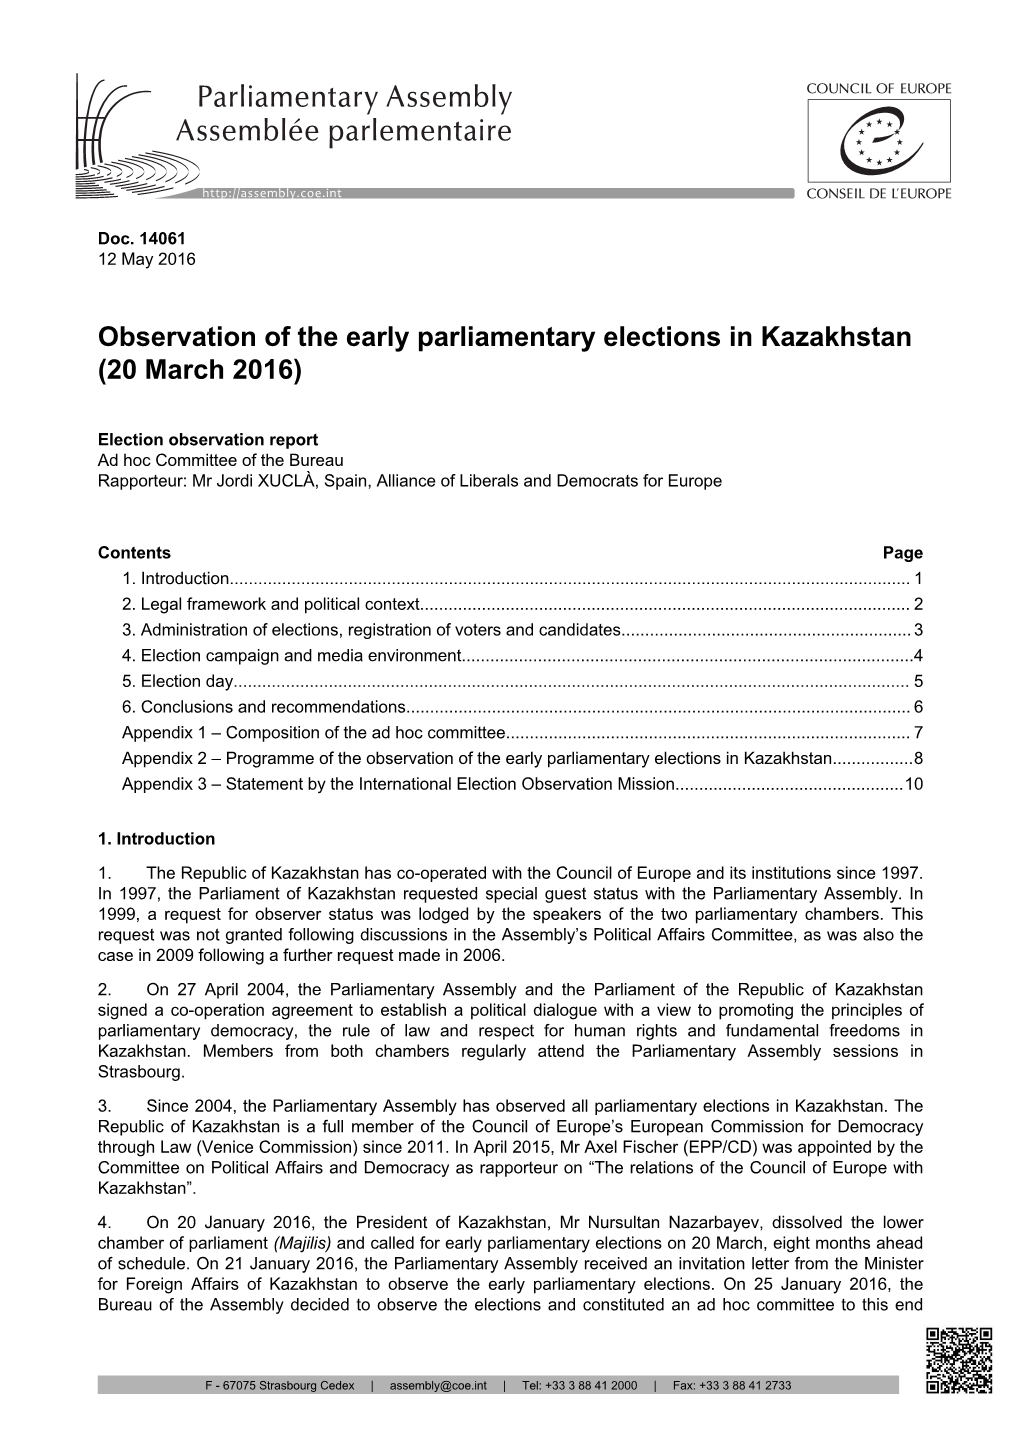 Observation of the Early Parliamentary Elections in Kazakhstan (20 March 2016)